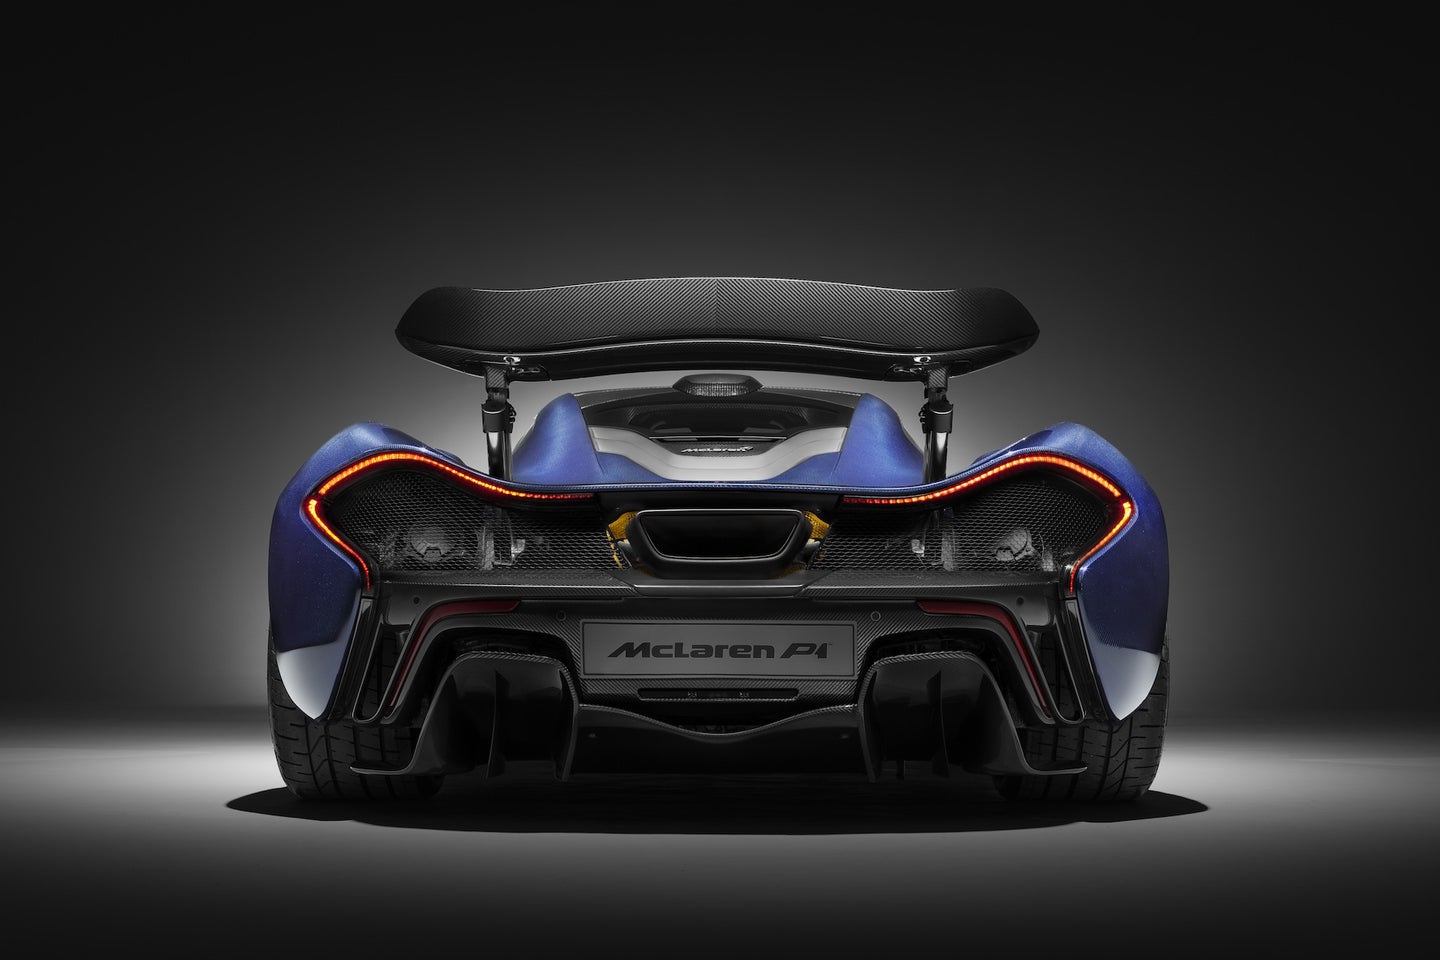 McLaren and BMW Are Teaming Up to Develop New Engine Technology